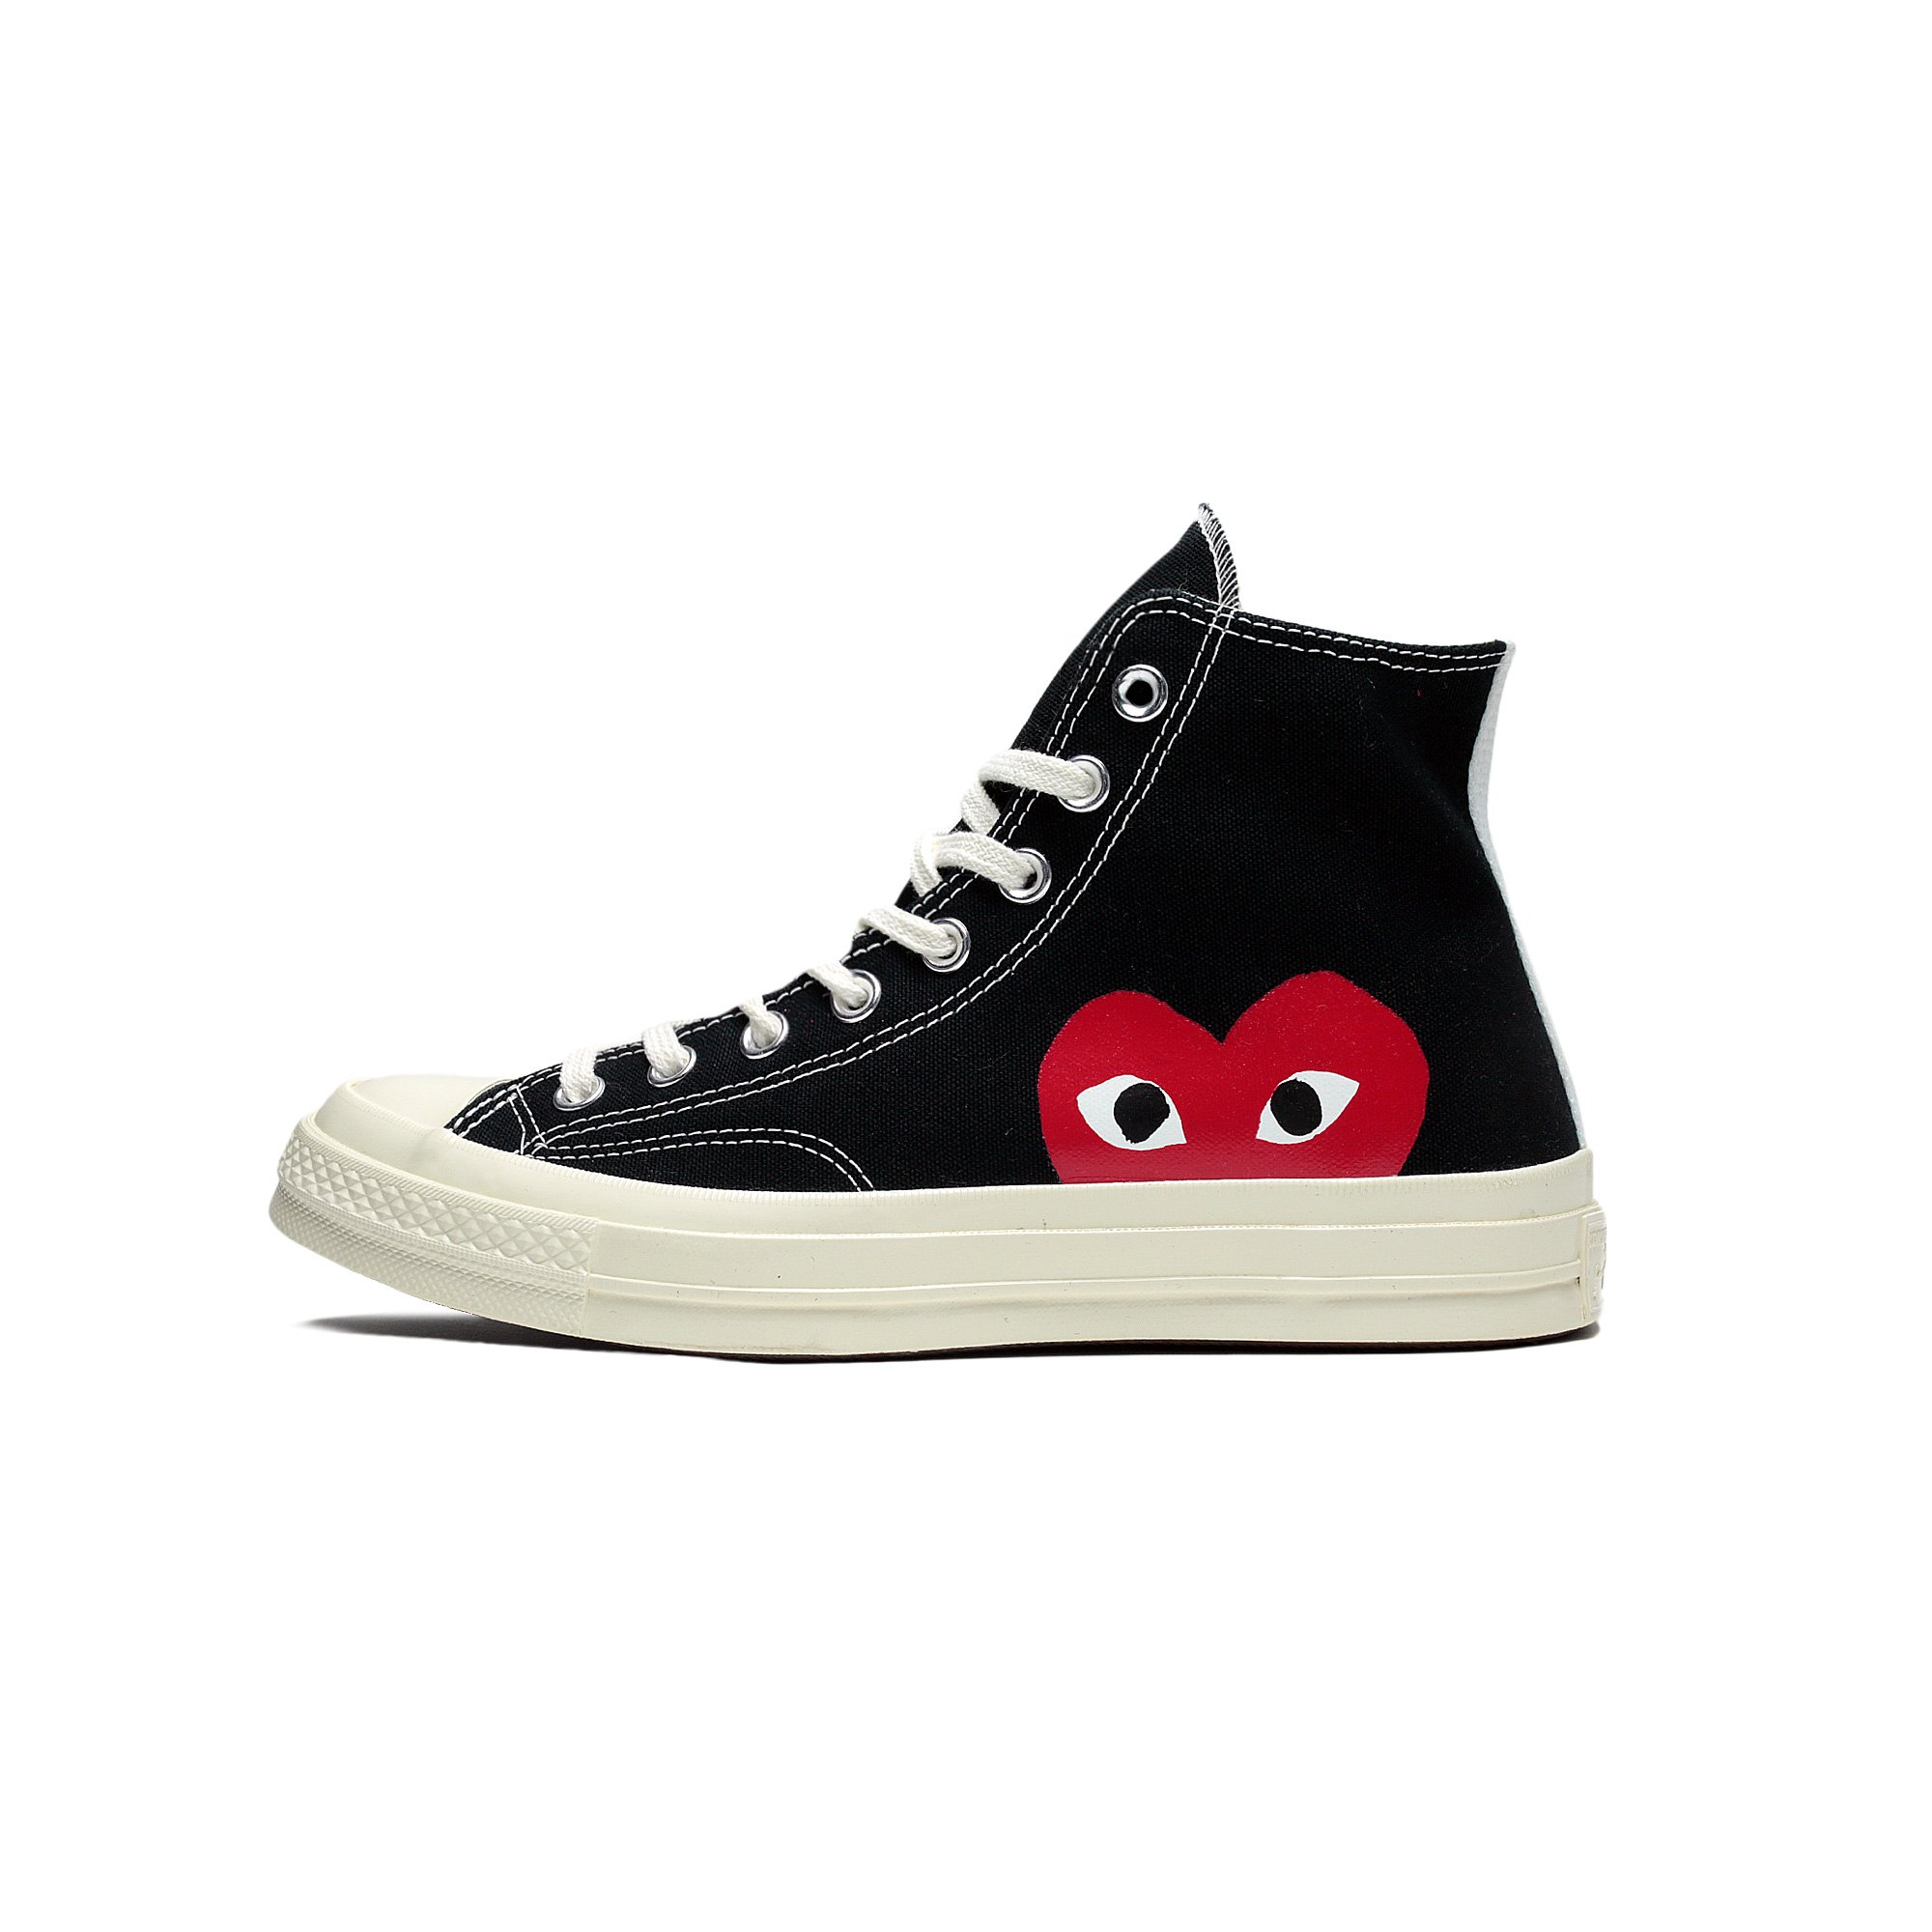 converse with half heart